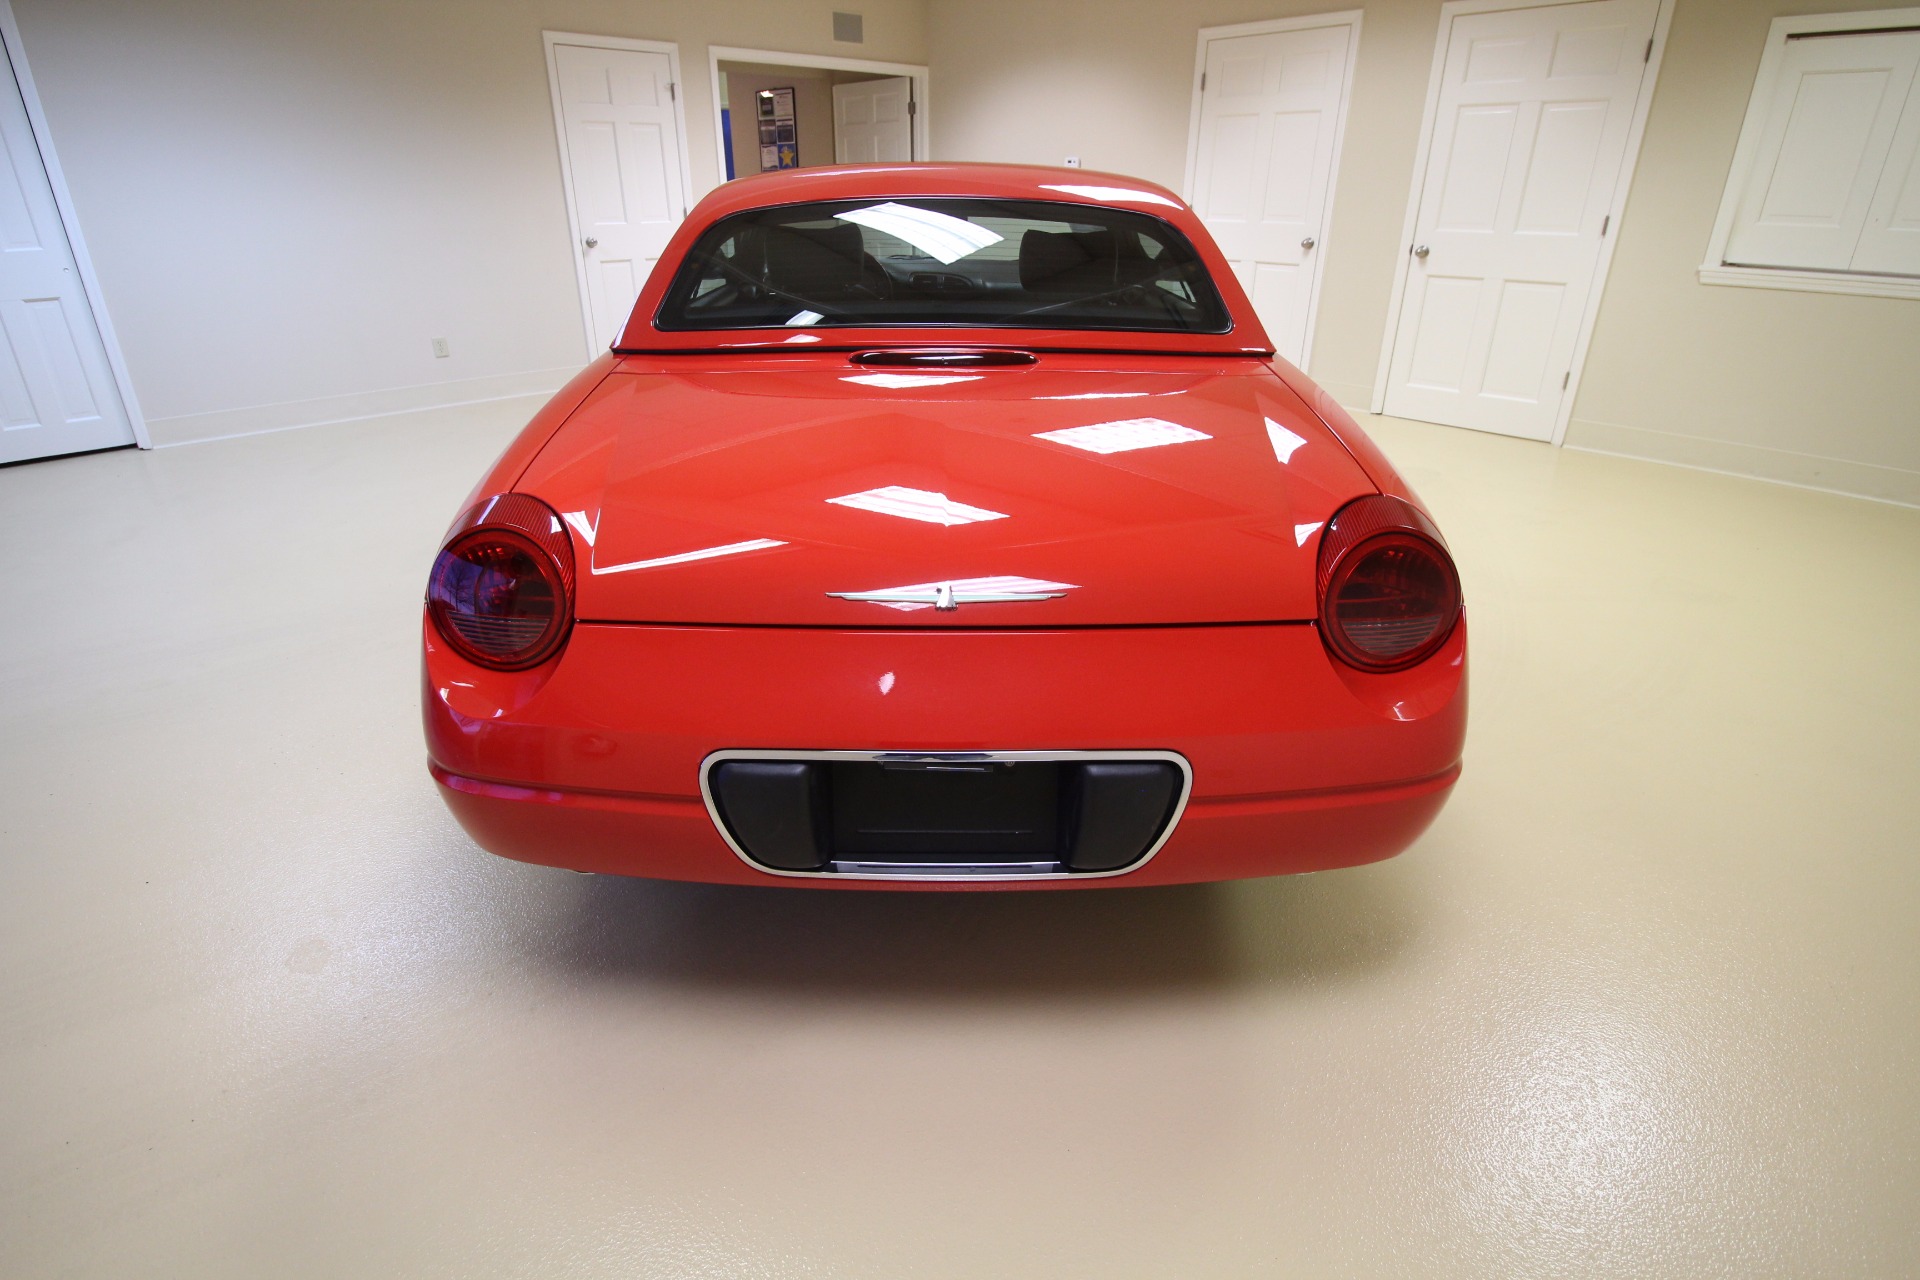 Used 2003 Torch Red with Torch Red Hard Top Ford Thunderbird Premium with removable top | Albany, NY